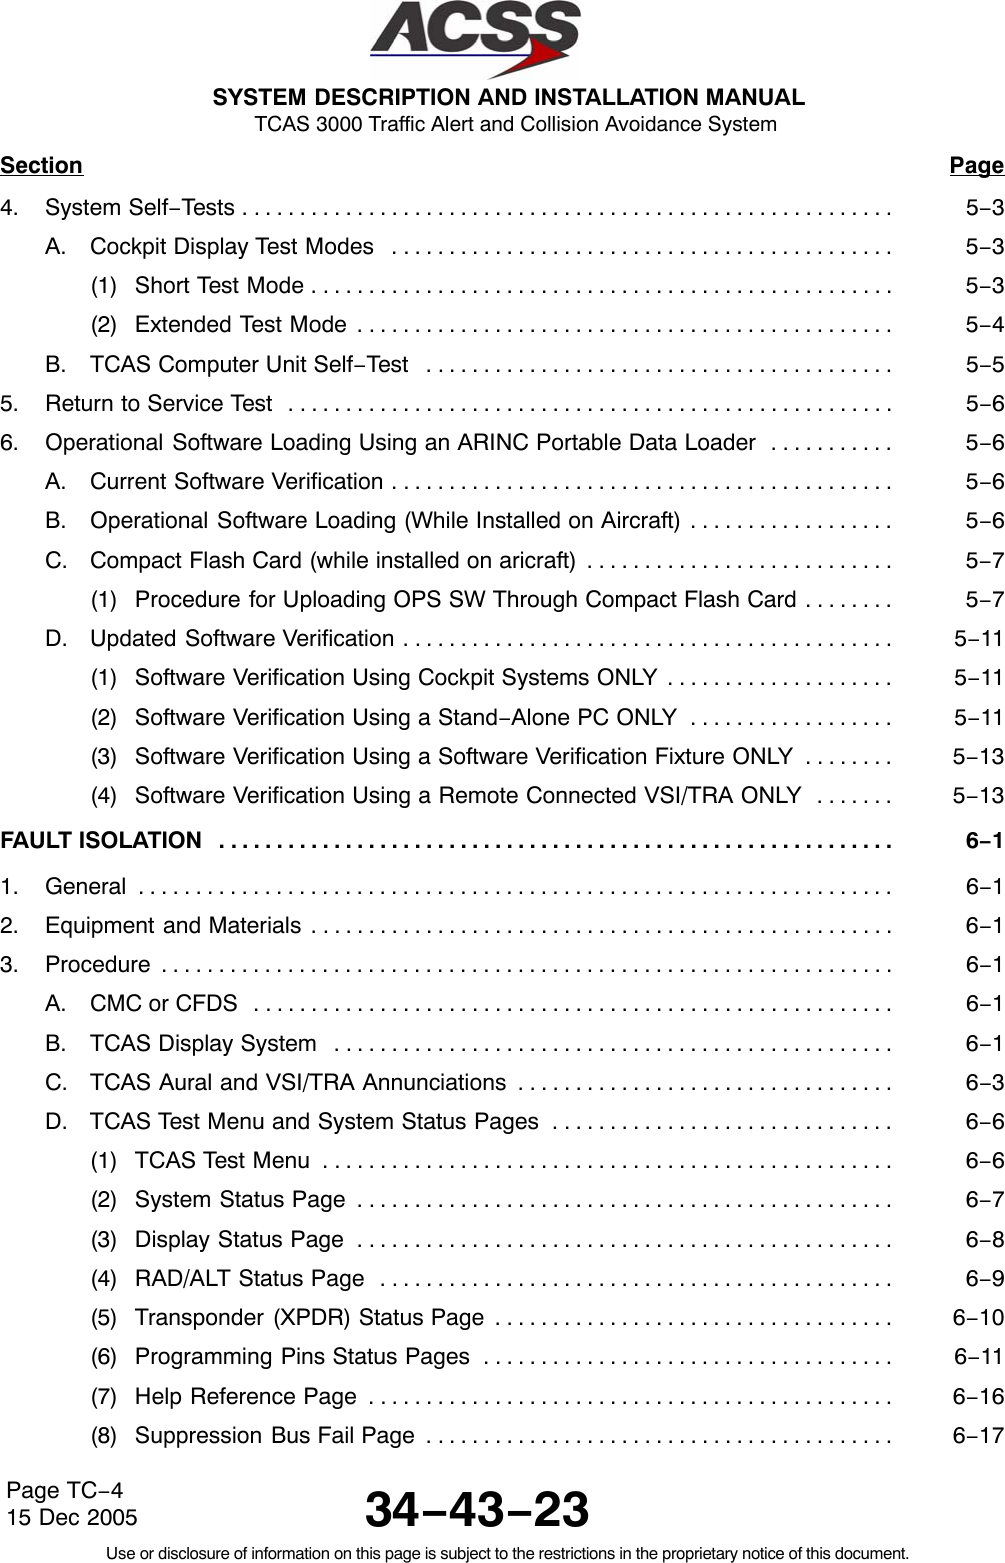 SYSTEM DESCRIPTION AND INSTALLATION MANUAL TCAS 3000 Traffic Alert and Collision Avoidance System34−43−23Use or disclosure of information on this page is subject to the restrictions in the proprietary notice of this document.Page TC−415 Dec 2005Section Page4. System Self−Tests 5−3. . . . . . . . . . . . . . . . . . . . . . . . . . . . . . . . . . . . . . . . . . . . . . . . . . . . . . . . . A. Cockpit Display Test Modes 5−3. . . . . . . . . . . . . . . . . . . . . . . . . . . . . . . . . . . . . . . . . . . . (1) Short Test Mode 5−3. . . . . . . . . . . . . . . . . . . . . . . . . . . . . . . . . . . . . . . . . . . . . . . . . . . (2) Extended Test Mode 5−4. . . . . . . . . . . . . . . . . . . . . . . . . . . . . . . . . . . . . . . . . . . . . . . B. TCAS Computer Unit Self−Test 5−5. . . . . . . . . . . . . . . . . . . . . . . . . . . . . . . . . . . . . . . . . 5. Return to Service Test 5−6. . . . . . . . . . . . . . . . . . . . . . . . . . . . . . . . . . . . . . . . . . . . . . . . . . . . . 6. Operational Software Loading Using an ARINC Portable Data Loader 5−6. . . . . . . . . . . A. Current Software Verification 5−6. . . . . . . . . . . . . . . . . . . . . . . . . . . . . . . . . . . . . . . . . . . . B. Operational Software Loading (While Installed on Aircraft) 5−6. . . . . . . . . . . . . . . . . . C. Compact Flash Card (while installed on aricraft) 5−7. . . . . . . . . . . . . . . . . . . . . . . . . . . (1) Procedure for Uploading OPS SW Through Compact Flash Card 5−7. . . . . . . . D. Updated Software Verification 5−11. . . . . . . . . . . . . . . . . . . . . . . . . . . . . . . . . . . . . . . . . . . (1) Software Verification Using Cockpit Systems ONLY 5−11. . . . . . . . . . . . . . . . . . . . (2) Software Verification Using a Stand−Alone PC ONLY 5−11. . . . . . . . . . . . . . . . . . (3) Software Verification Using a Software Verification Fixture ONLY 5−13. . . . . . . . (4) Software Verification Using a Remote Connected VSI/TRA ONLY 5−13. . . . . . . FAULT ISOLATION 6−1. . . . . . . . . . . . . . . . . . . . . . . . . . . . . . . . . . . . . . . . . . . . . . . . . . . . . . . . . . . 1. General 6−1. . . . . . . . . . . . . . . . . . . . . . . . . . . . . . . . . . . . . . . . . . . . . . . . . . . . . . . . . . . . . . . . . . 2. Equipment and Materials 6−1. . . . . . . . . . . . . . . . . . . . . . . . . . . . . . . . . . . . . . . . . . . . . . . . . . . 3. Procedure 6−1. . . . . . . . . . . . . . . . . . . . . . . . . . . . . . . . . . . . . . . . . . . . . . . . . . . . . . . . . . . . . . . . A. CMC or CFDS 6−1. . . . . . . . . . . . . . . . . . . . . . . . . . . . . . . . . . . . . . . . . . . . . . . . . . . . . . . . B. TCAS Display System 6−1. . . . . . . . . . . . . . . . . . . . . . . . . . . . . . . . . . . . . . . . . . . . . . . . . C. TCAS Aural and VSI/TRA Annunciations 6−3. . . . . . . . . . . . . . . . . . . . . . . . . . . . . . . . . D. TCAS Test Menu and System Status Pages 6−6. . . . . . . . . . . . . . . . . . . . . . . . . . . . . . (1) TCAS Test Menu 6−6. . . . . . . . . . . . . . . . . . . . . . . . . . . . . . . . . . . . . . . . . . . . . . . . . . (2) System Status Page 6−7. . . . . . . . . . . . . . . . . . . . . . . . . . . . . . . . . . . . . . . . . . . . . . . (3) Display Status Page 6−8. . . . . . . . . . . . . . . . . . . . . . . . . . . . . . . . . . . . . . . . . . . . . . . (4) RAD/ALT Status Page 6−9. . . . . . . . . . . . . . . . . . . . . . . . . . . . . . . . . . . . . . . . . . . . . (5) Transponder (XPDR) Status Page 6−10. . . . . . . . . . . . . . . . . . . . . . . . . . . . . . . . . . . (6) Programming Pins Status Pages 6−11. . . . . . . . . . . . . . . . . . . . . . . . . . . . . . . . . . . . (7) Help Reference Page 6−16. . . . . . . . . . . . . . . . . . . . . . . . . . . . . . . . . . . . . . . . . . . . . . (8) Suppression Bus Fail Page 6−17. . . . . . . . . . . . . . . . . . . . . . . . . . . . . . . . . . . . . . . . . 